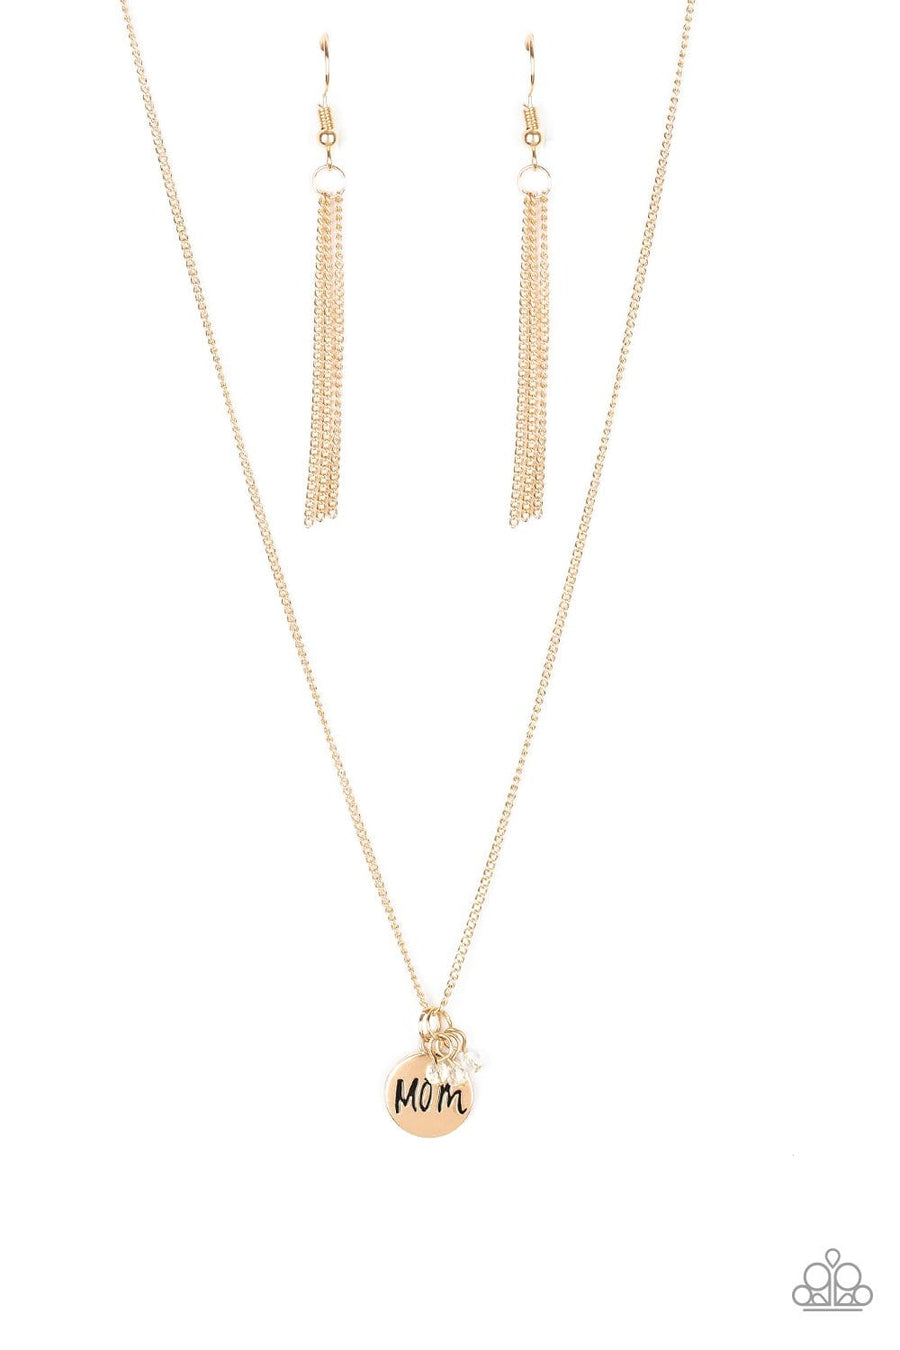 Mom Mode Gold Necklace